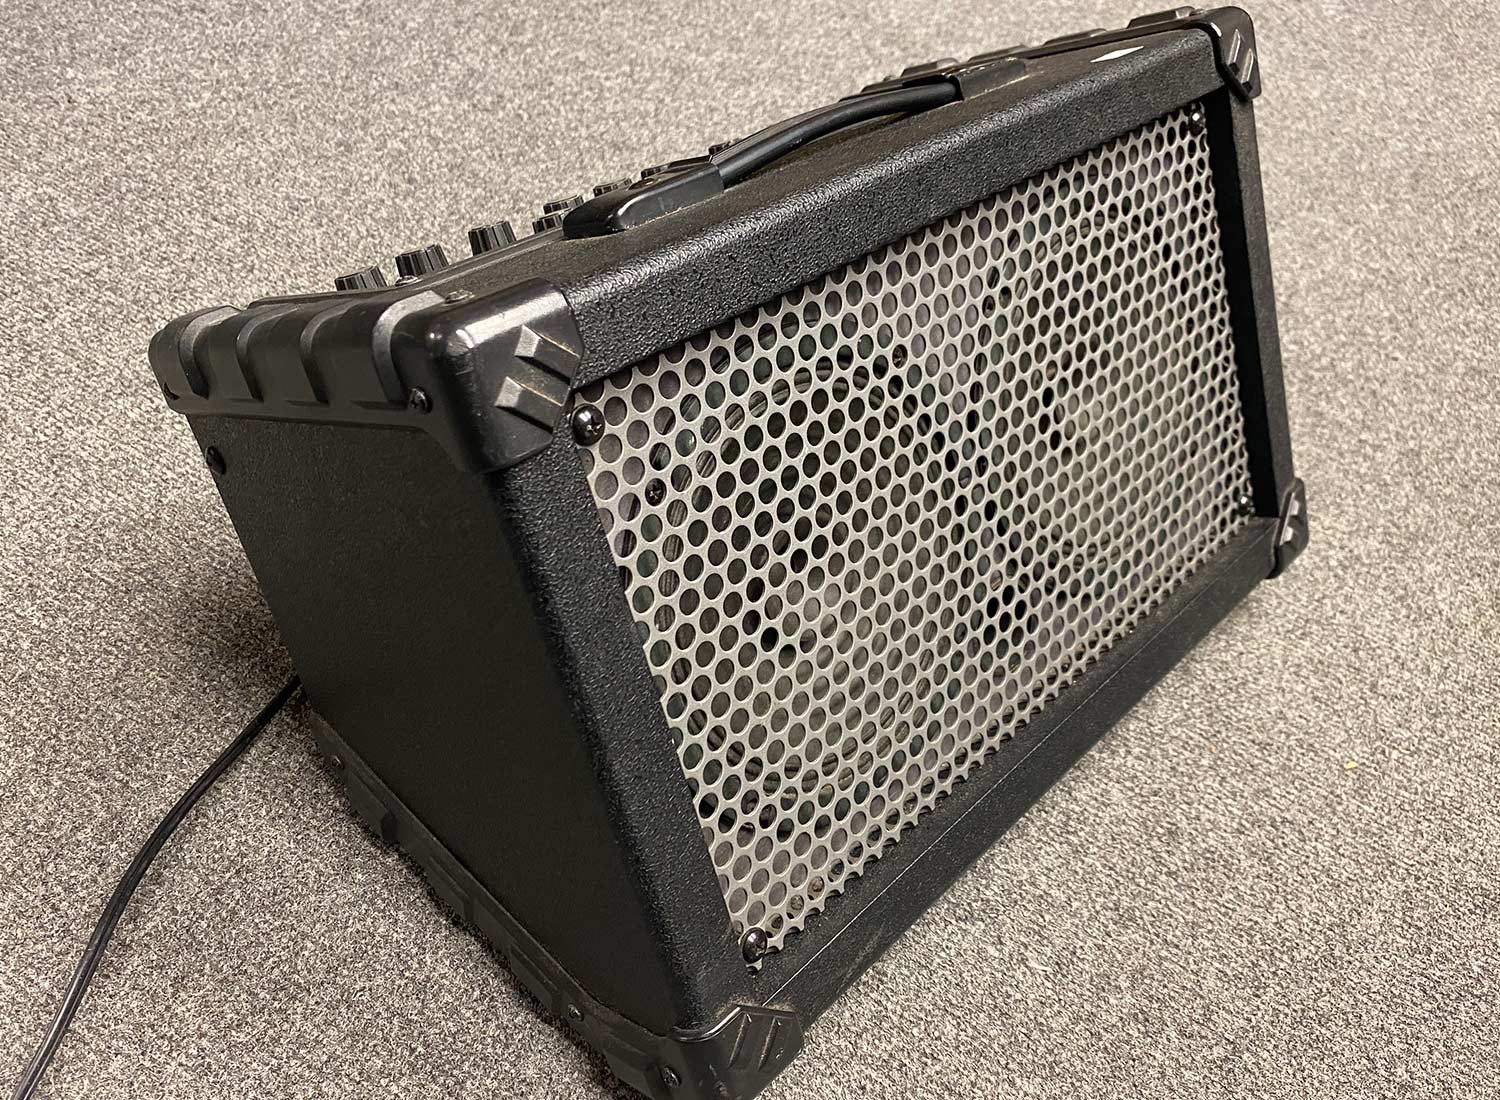 image of guitar amplifier for sale from WestSide Music